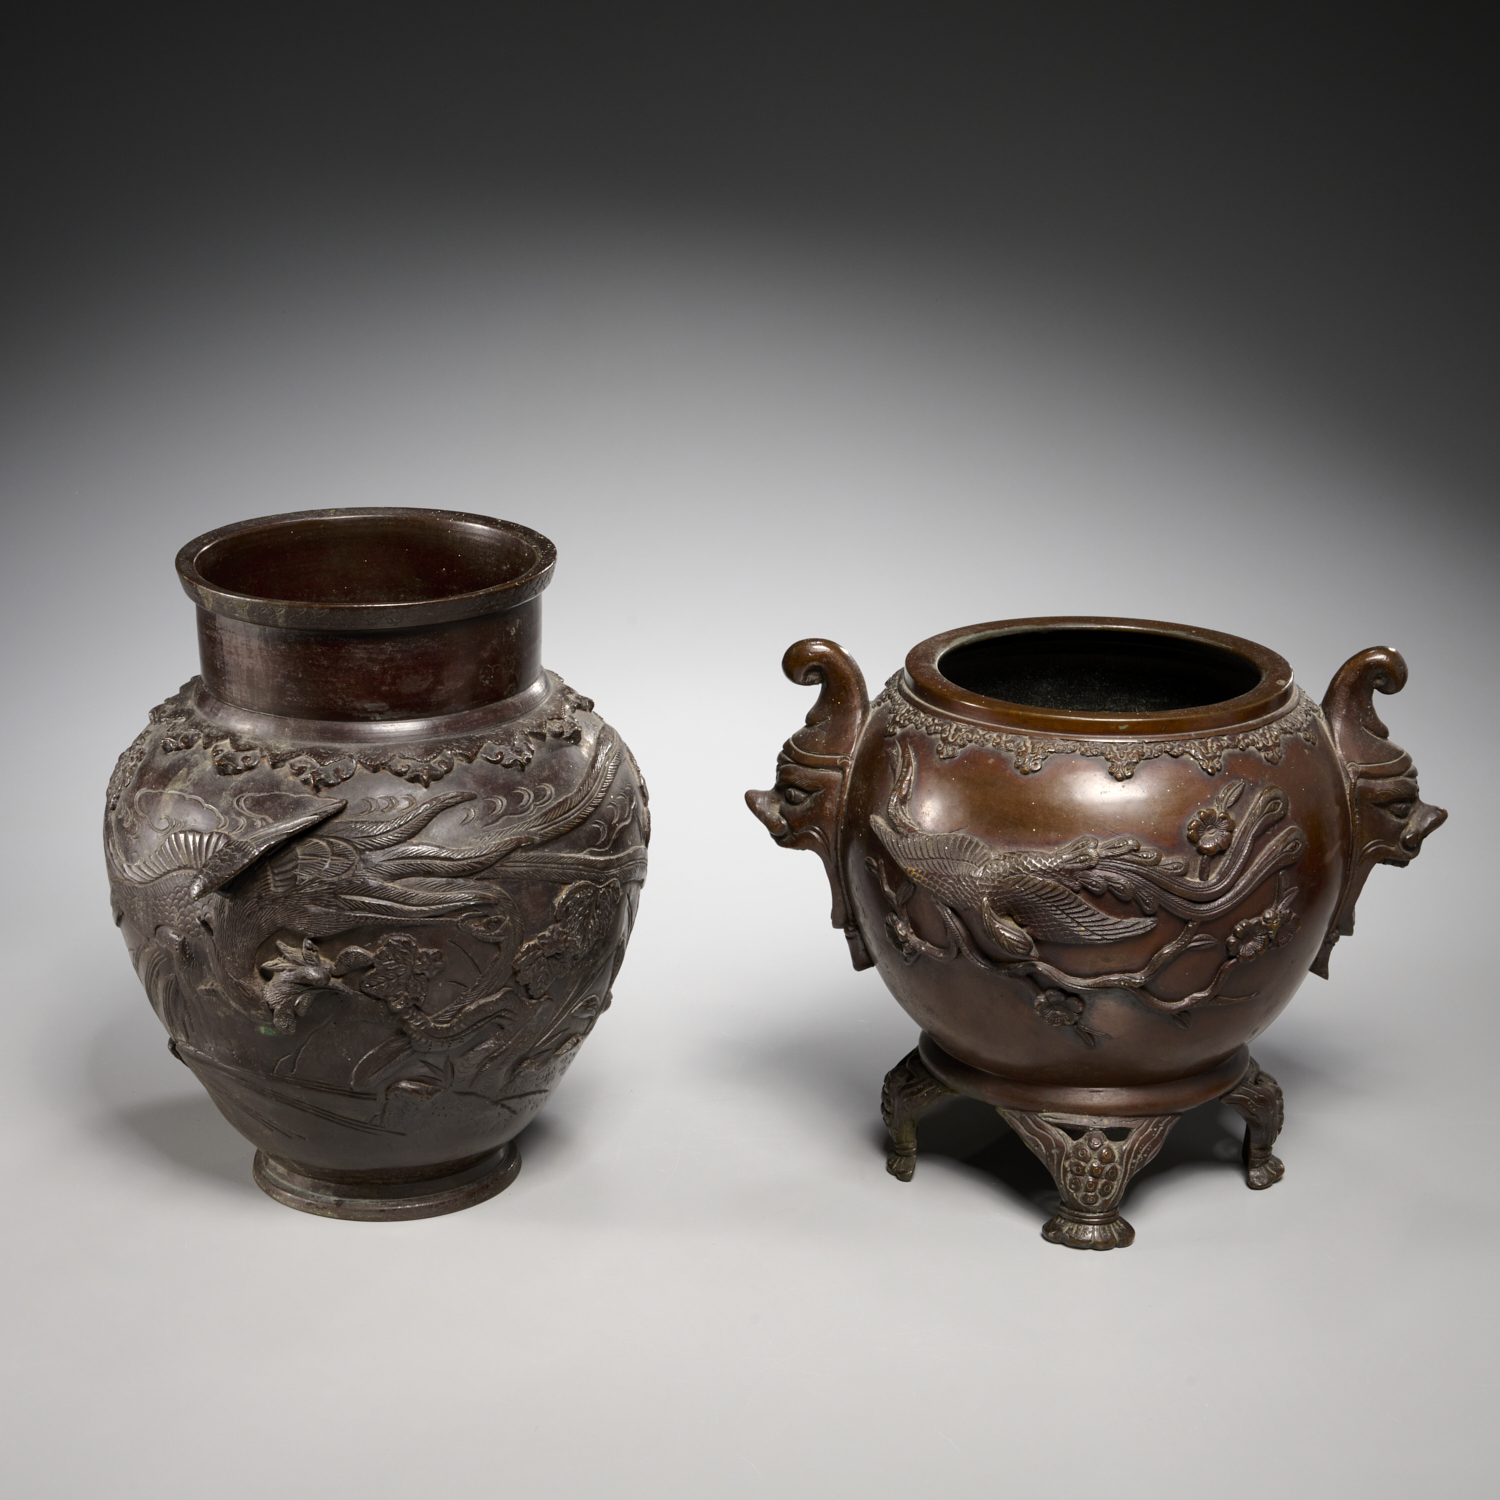  2 JAPANESE PATINATED BRONZE VESSELS 3602a8